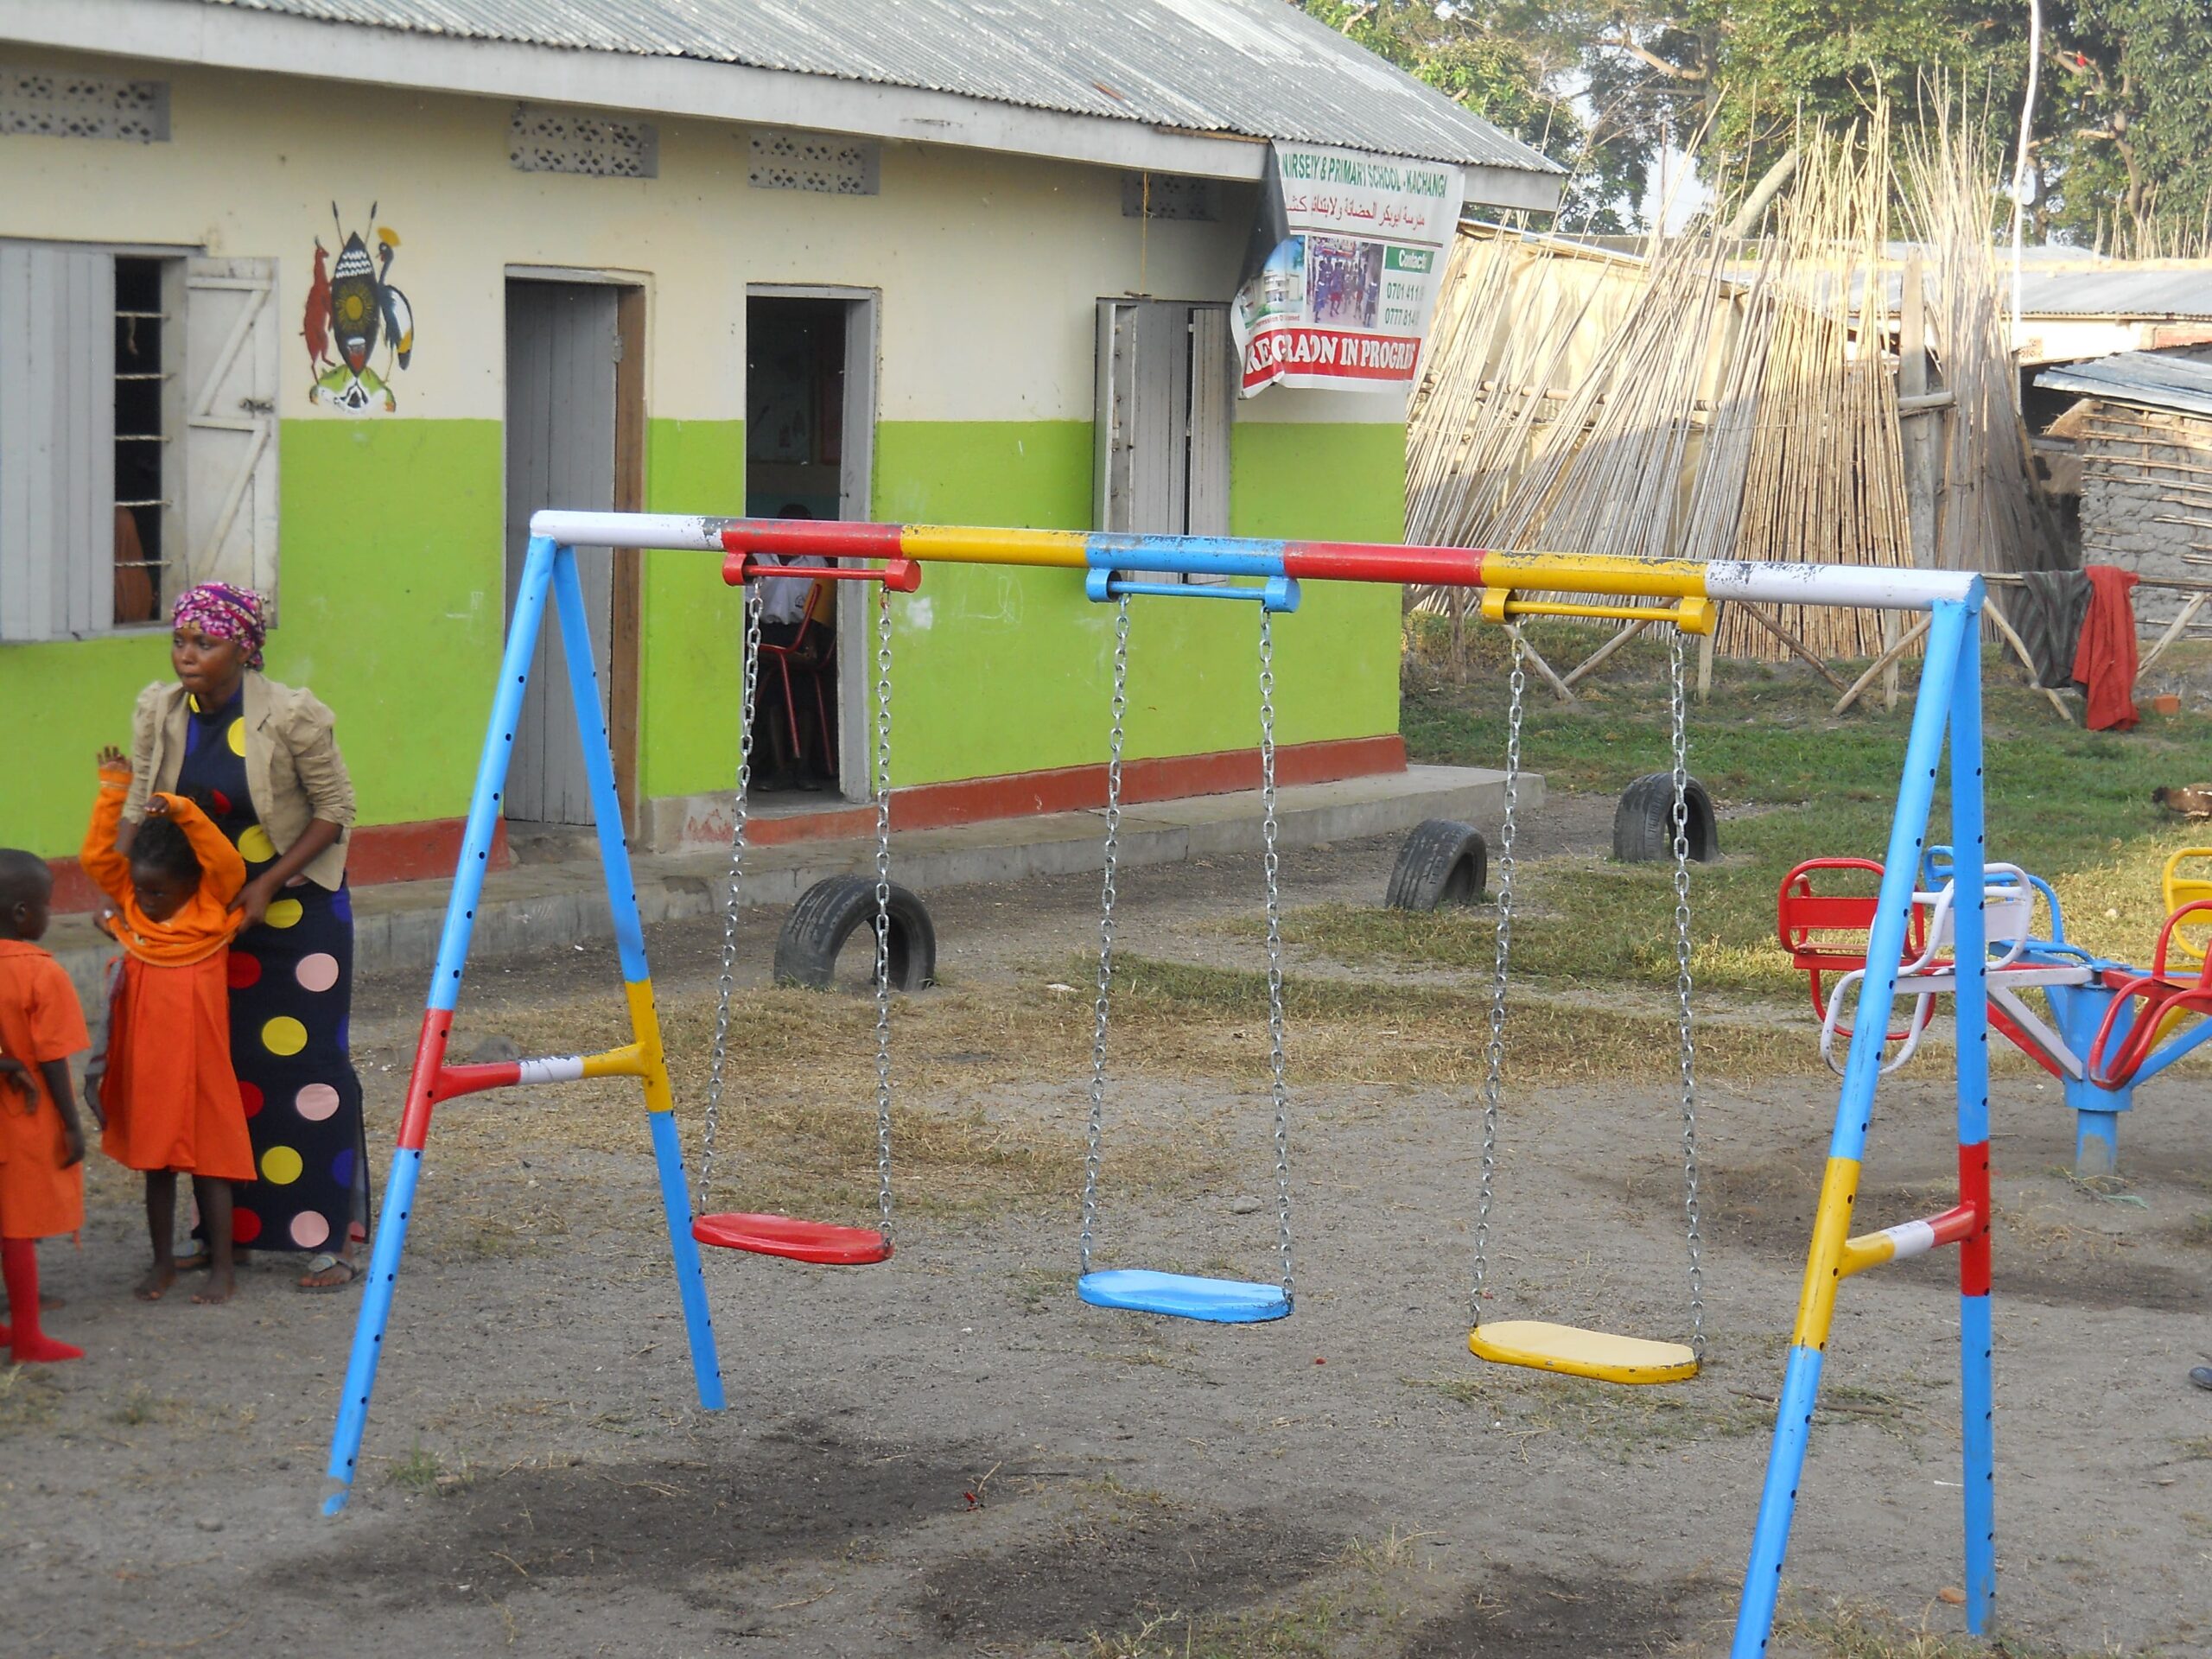 "A joyful view of the school compound in Kalangala District, Kachanga Fishing Community, featuring swings for children's play."